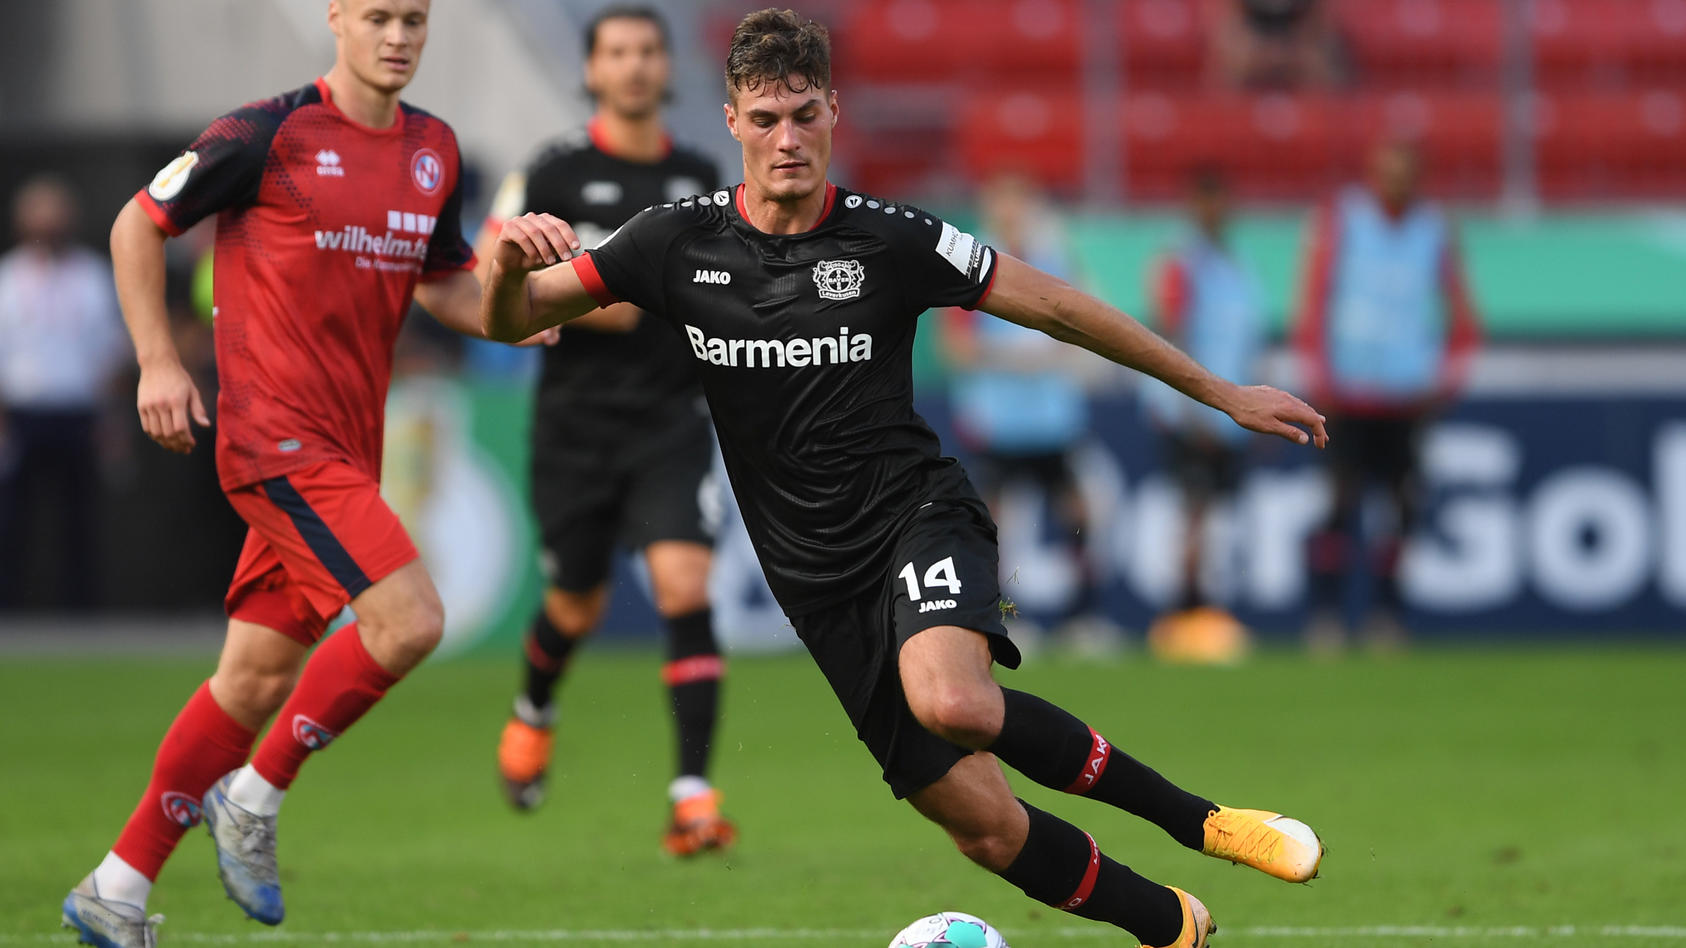 LEVERKUSEN, GERMANY - SEPTEMBER 13: Patrik Schick of Leverkusen controls the ball during the DFB Cup first round match between Eintracht Norderstedt and Bayer 04 Leverkusen at BayArena on September 13, 2020 in Leverkusen, Germany. (Photo by Frederic 